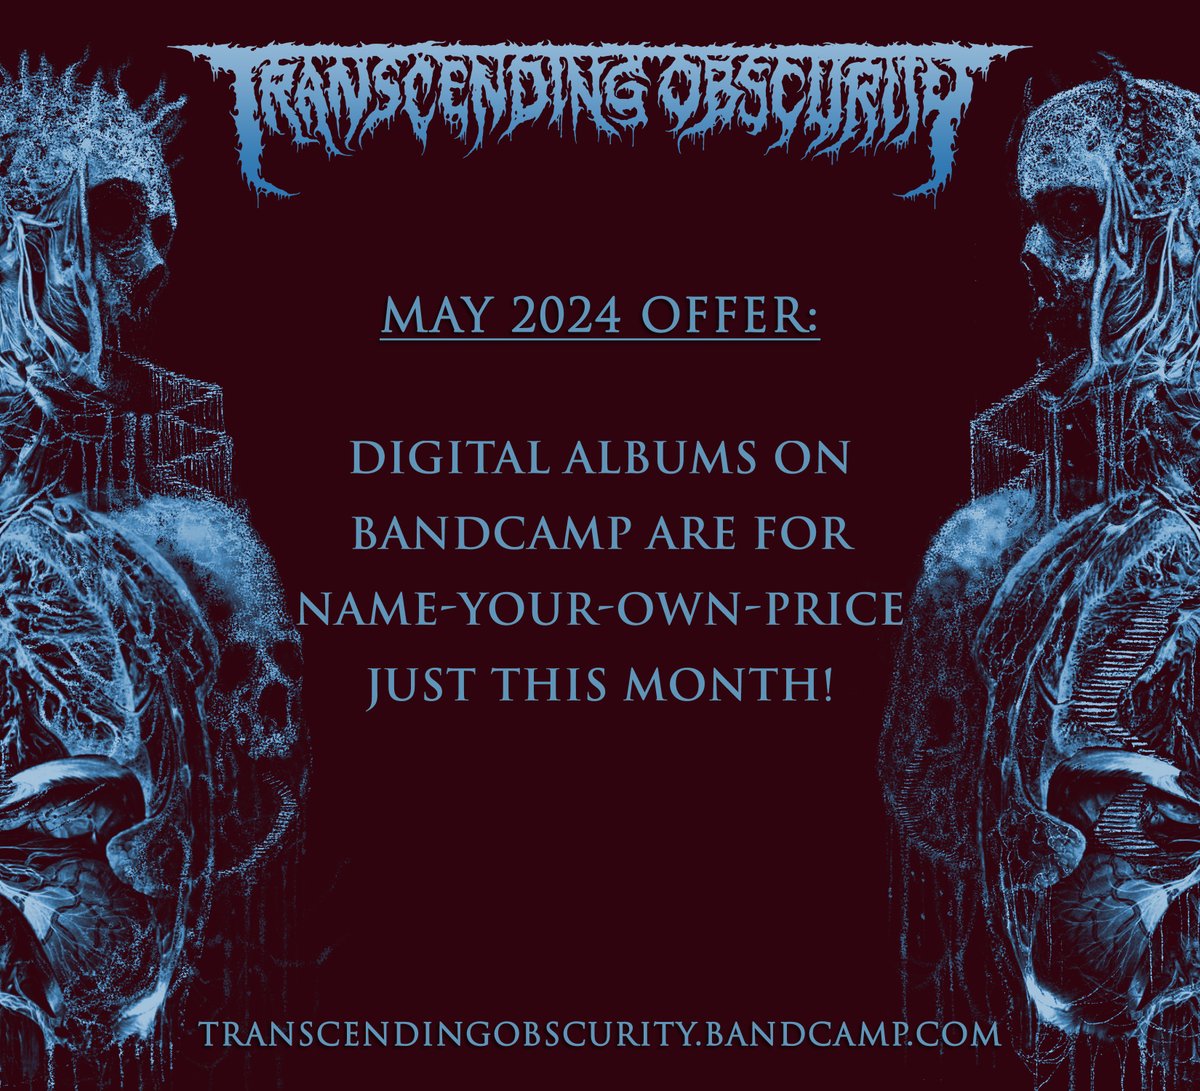 MAY OFFER: Digital albums on Bandcamp are for Name-Your-Own-Price! Here's something special for you all this month! Please make the most of it and get some good music that you may have missed out on! Label Bandcamp - transcendingobscurity.bandcamp.com